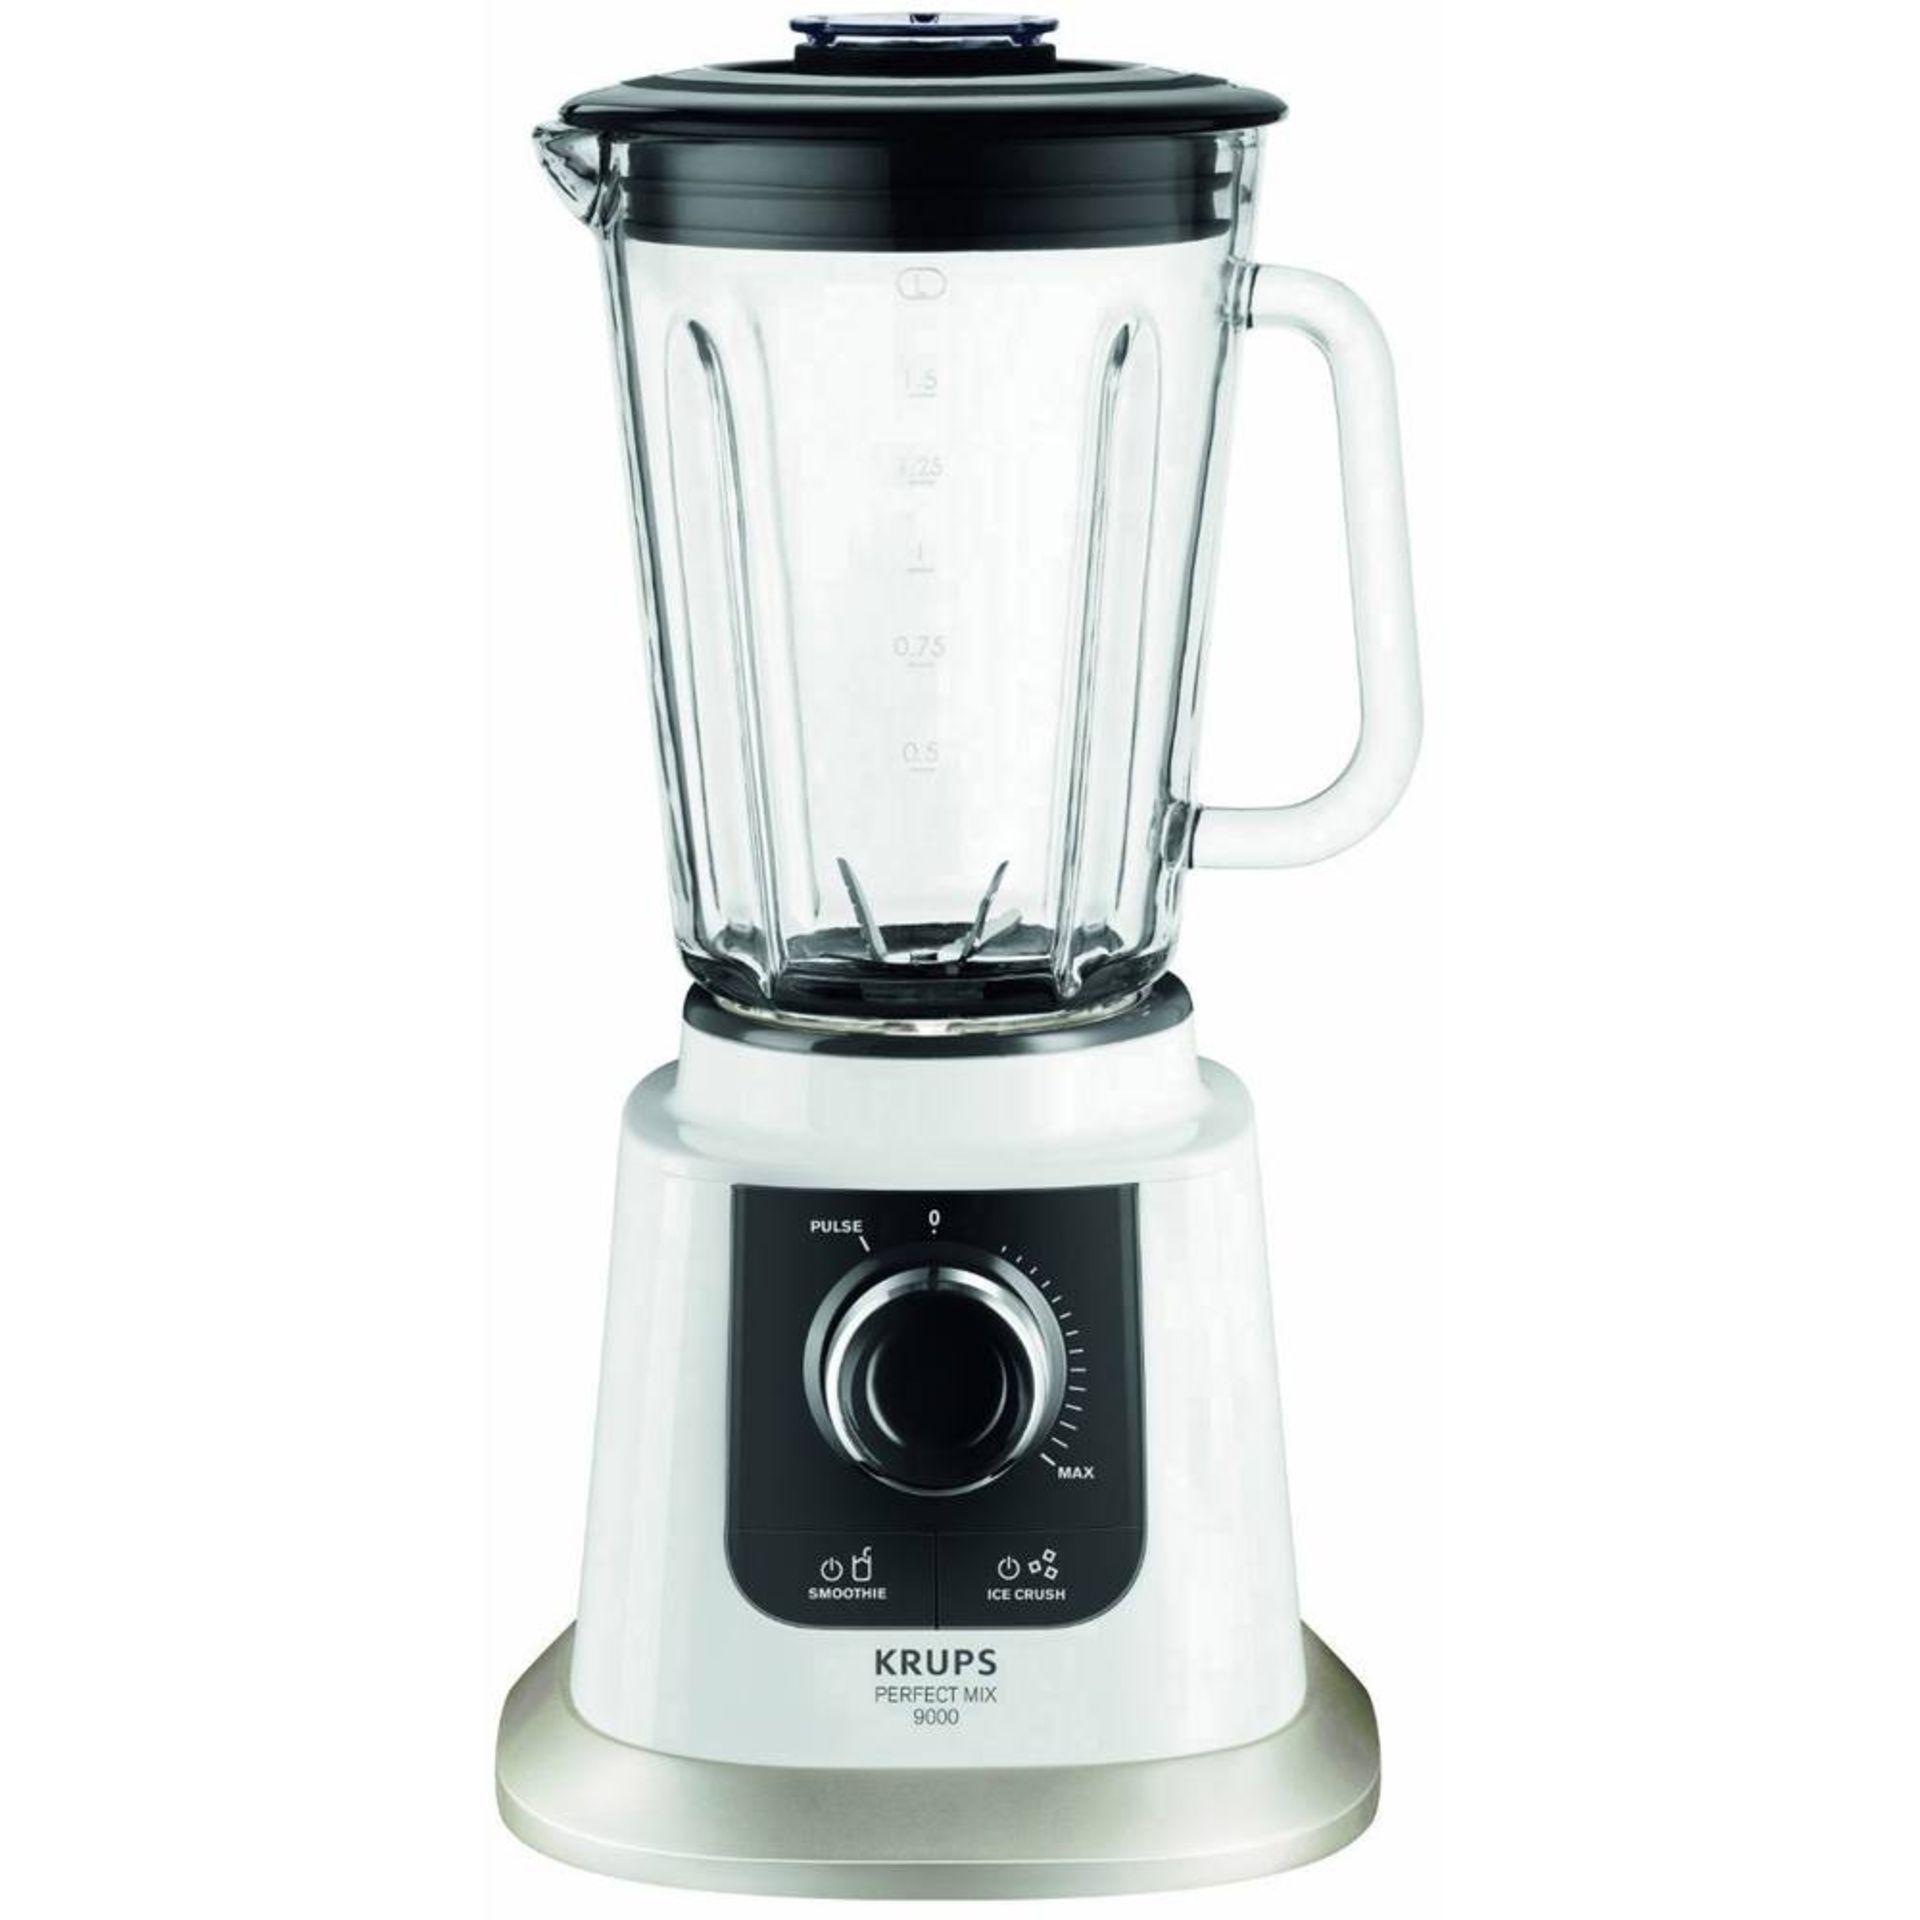 + VAT Brand New Krups 850W Perfect Mix 9000 Blender - Multiple Functions Inc Ice Crush/Smoothie - 6